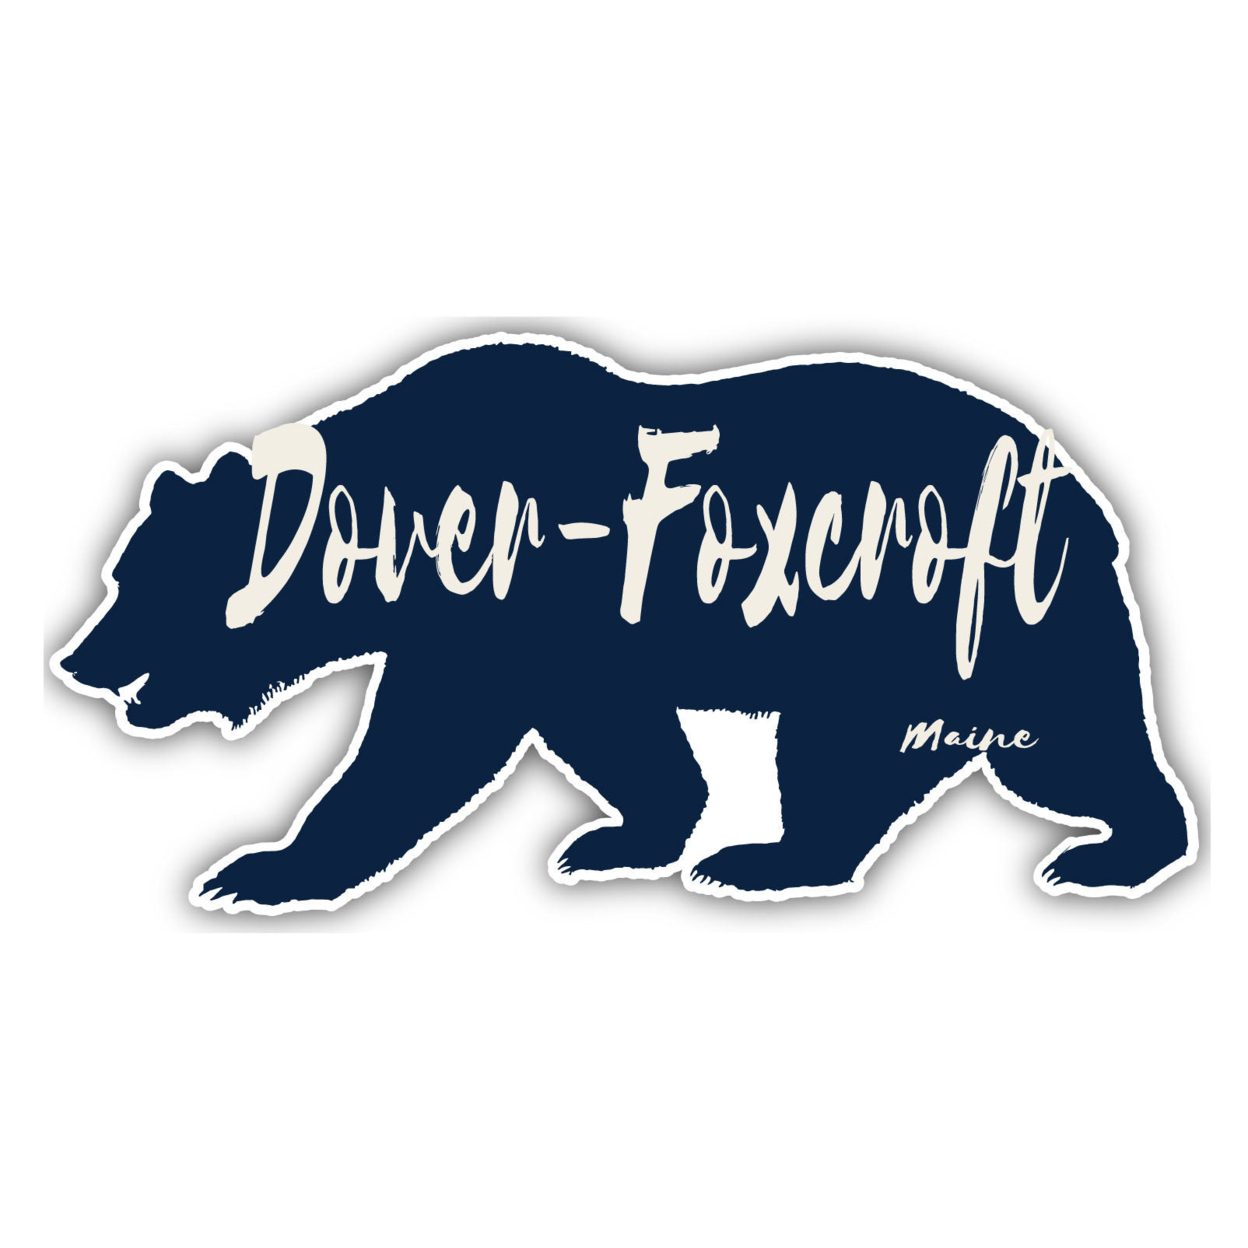 Dover-Foxcroft Maine Souvenir Decorative Stickers (Choose Theme And Size) - 4-Pack, 8-Inch, Bear